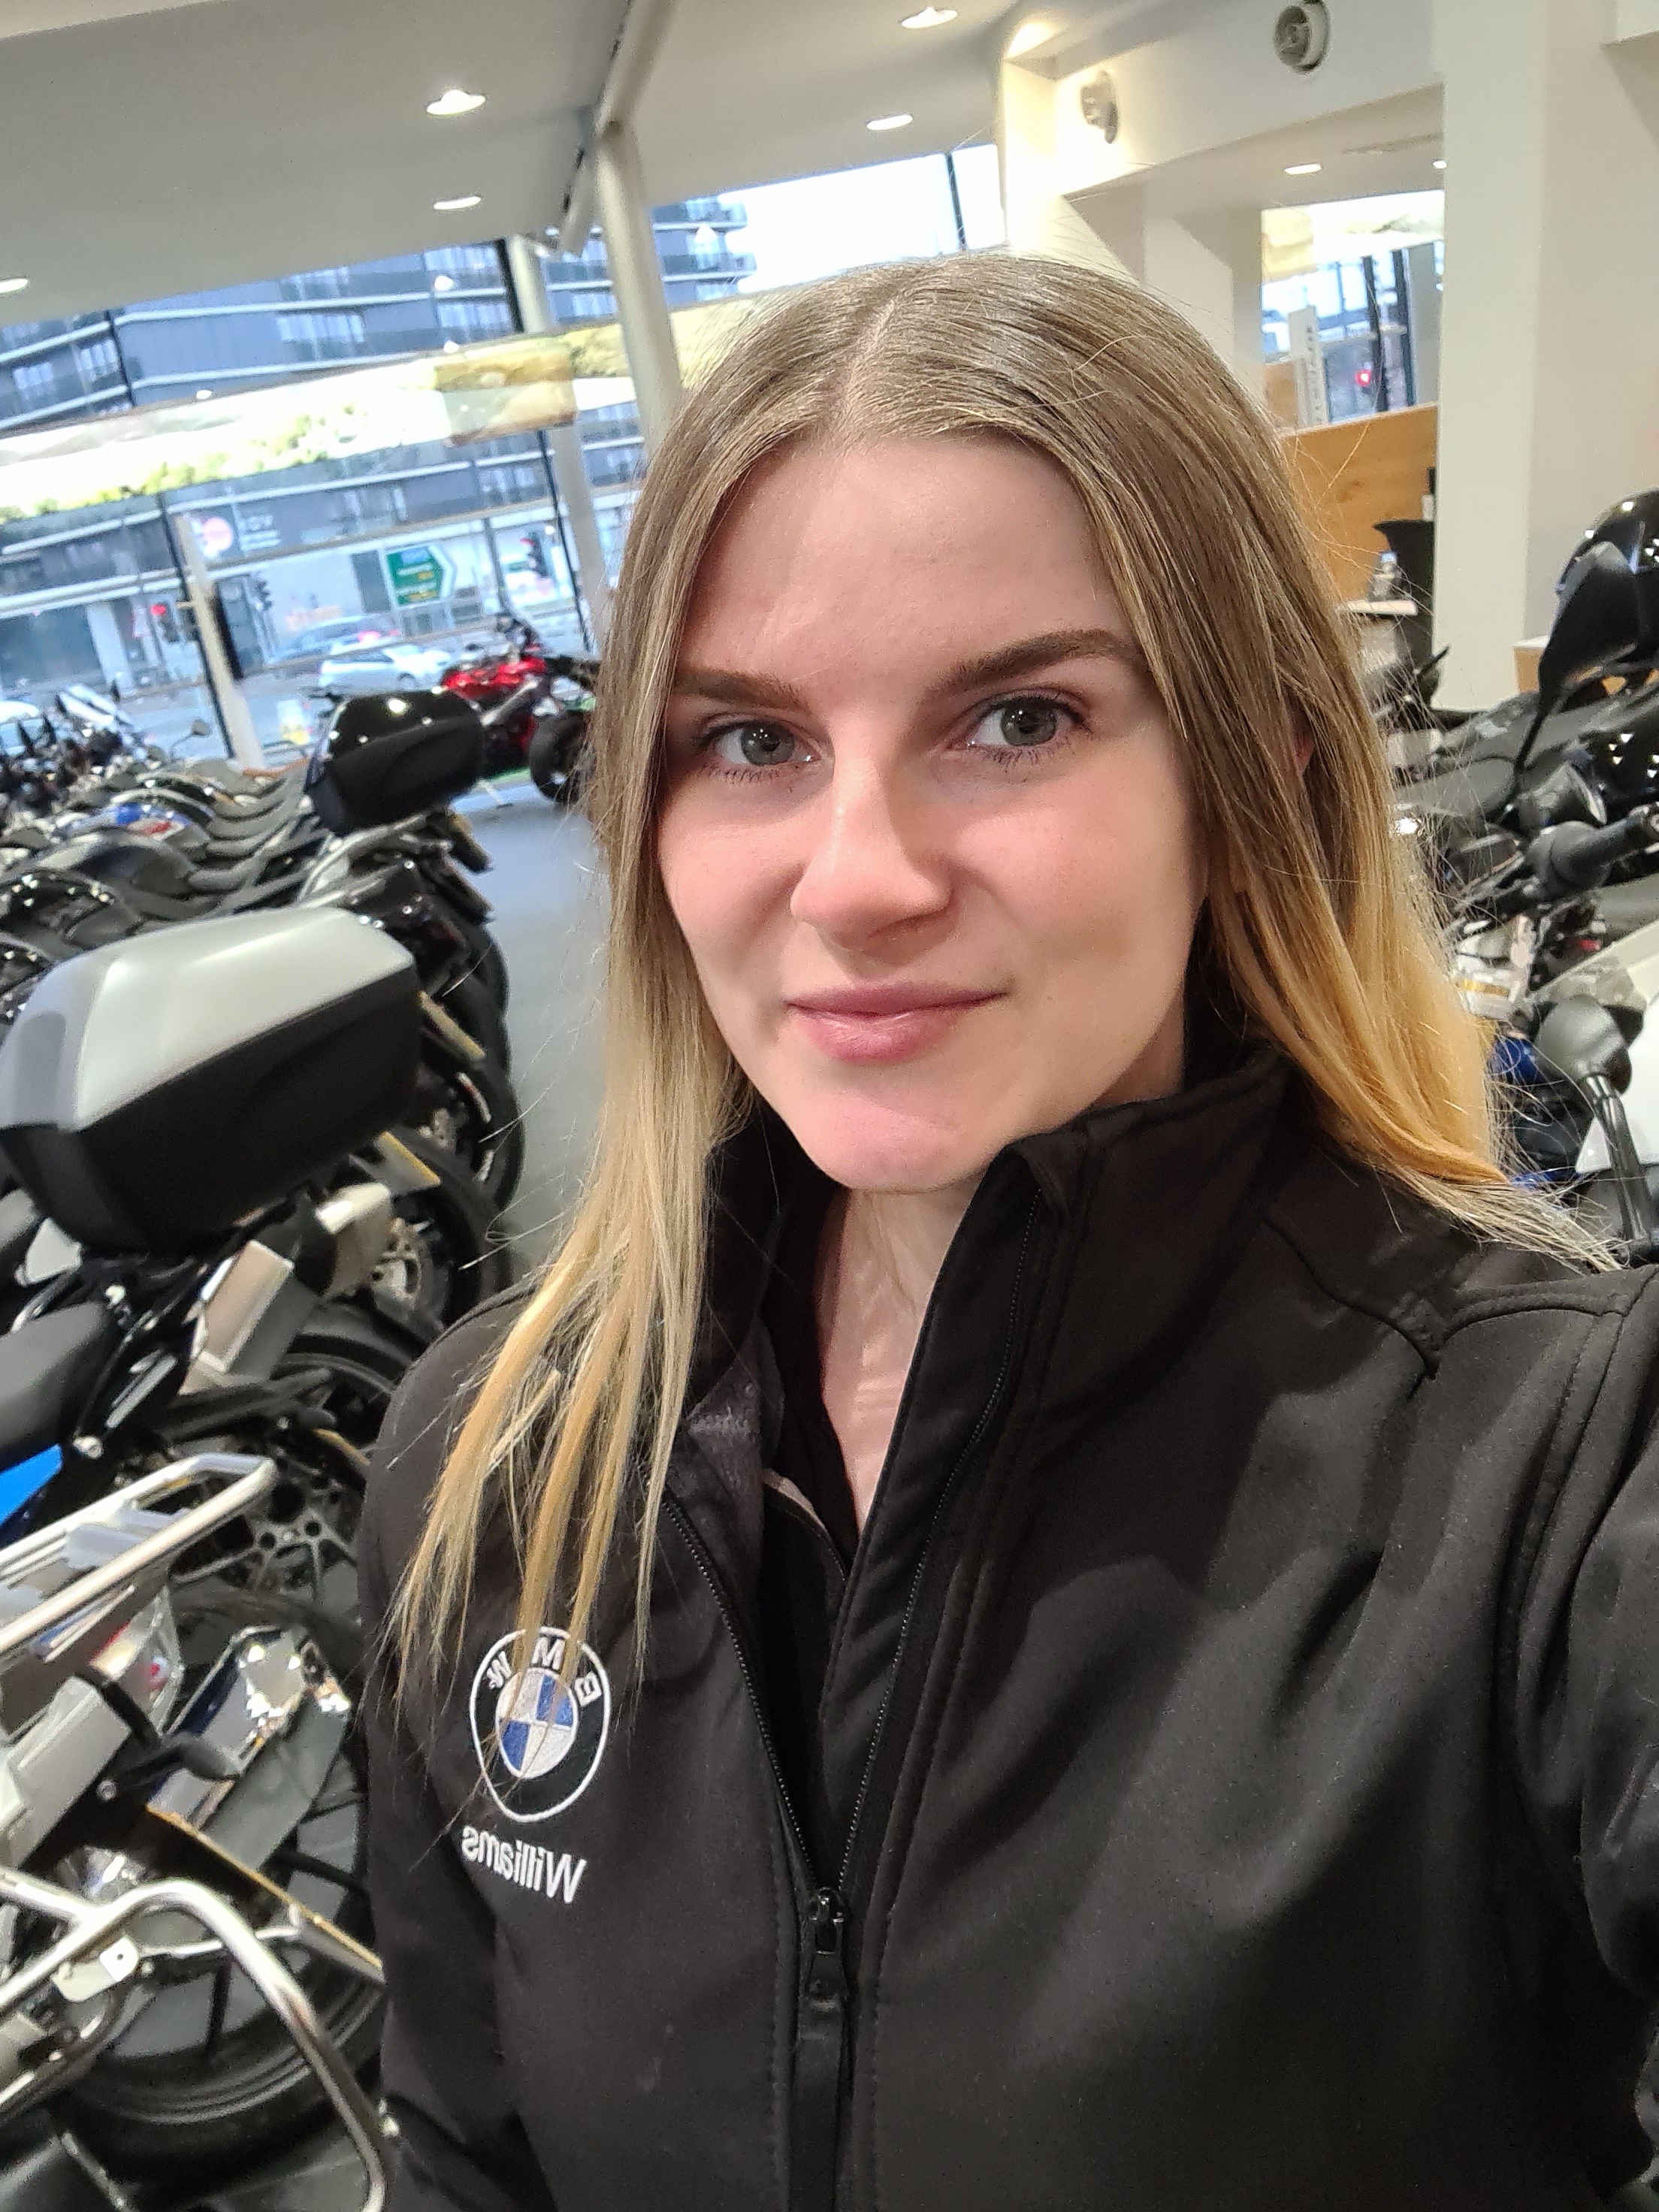 The 29-year-old at her place of work, BMW motorcycle dealership Williams Motorrad in Manchester